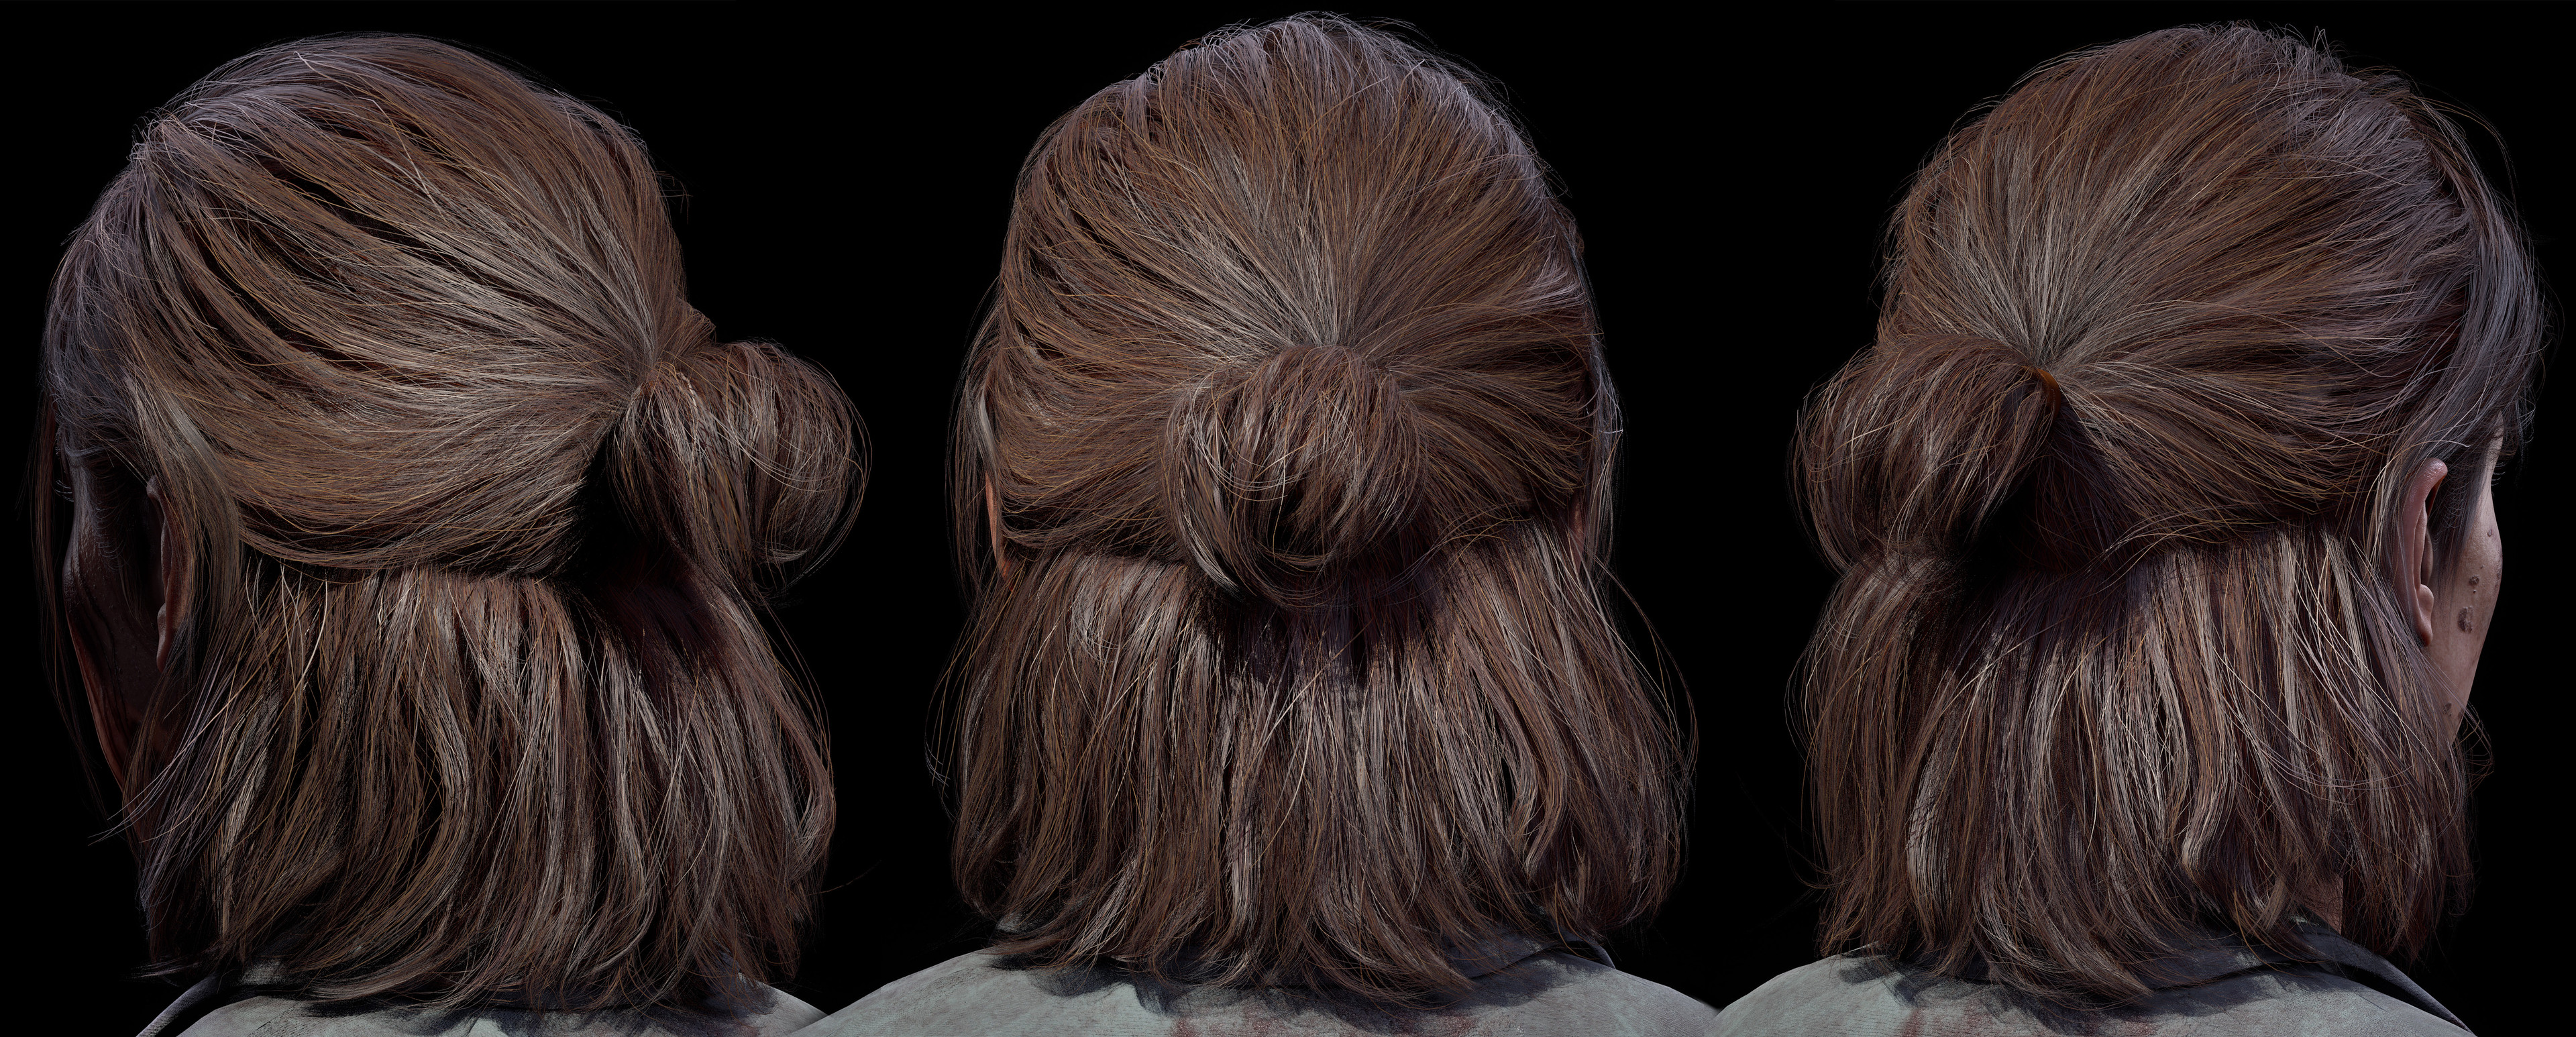 realtime Hairs made with cards